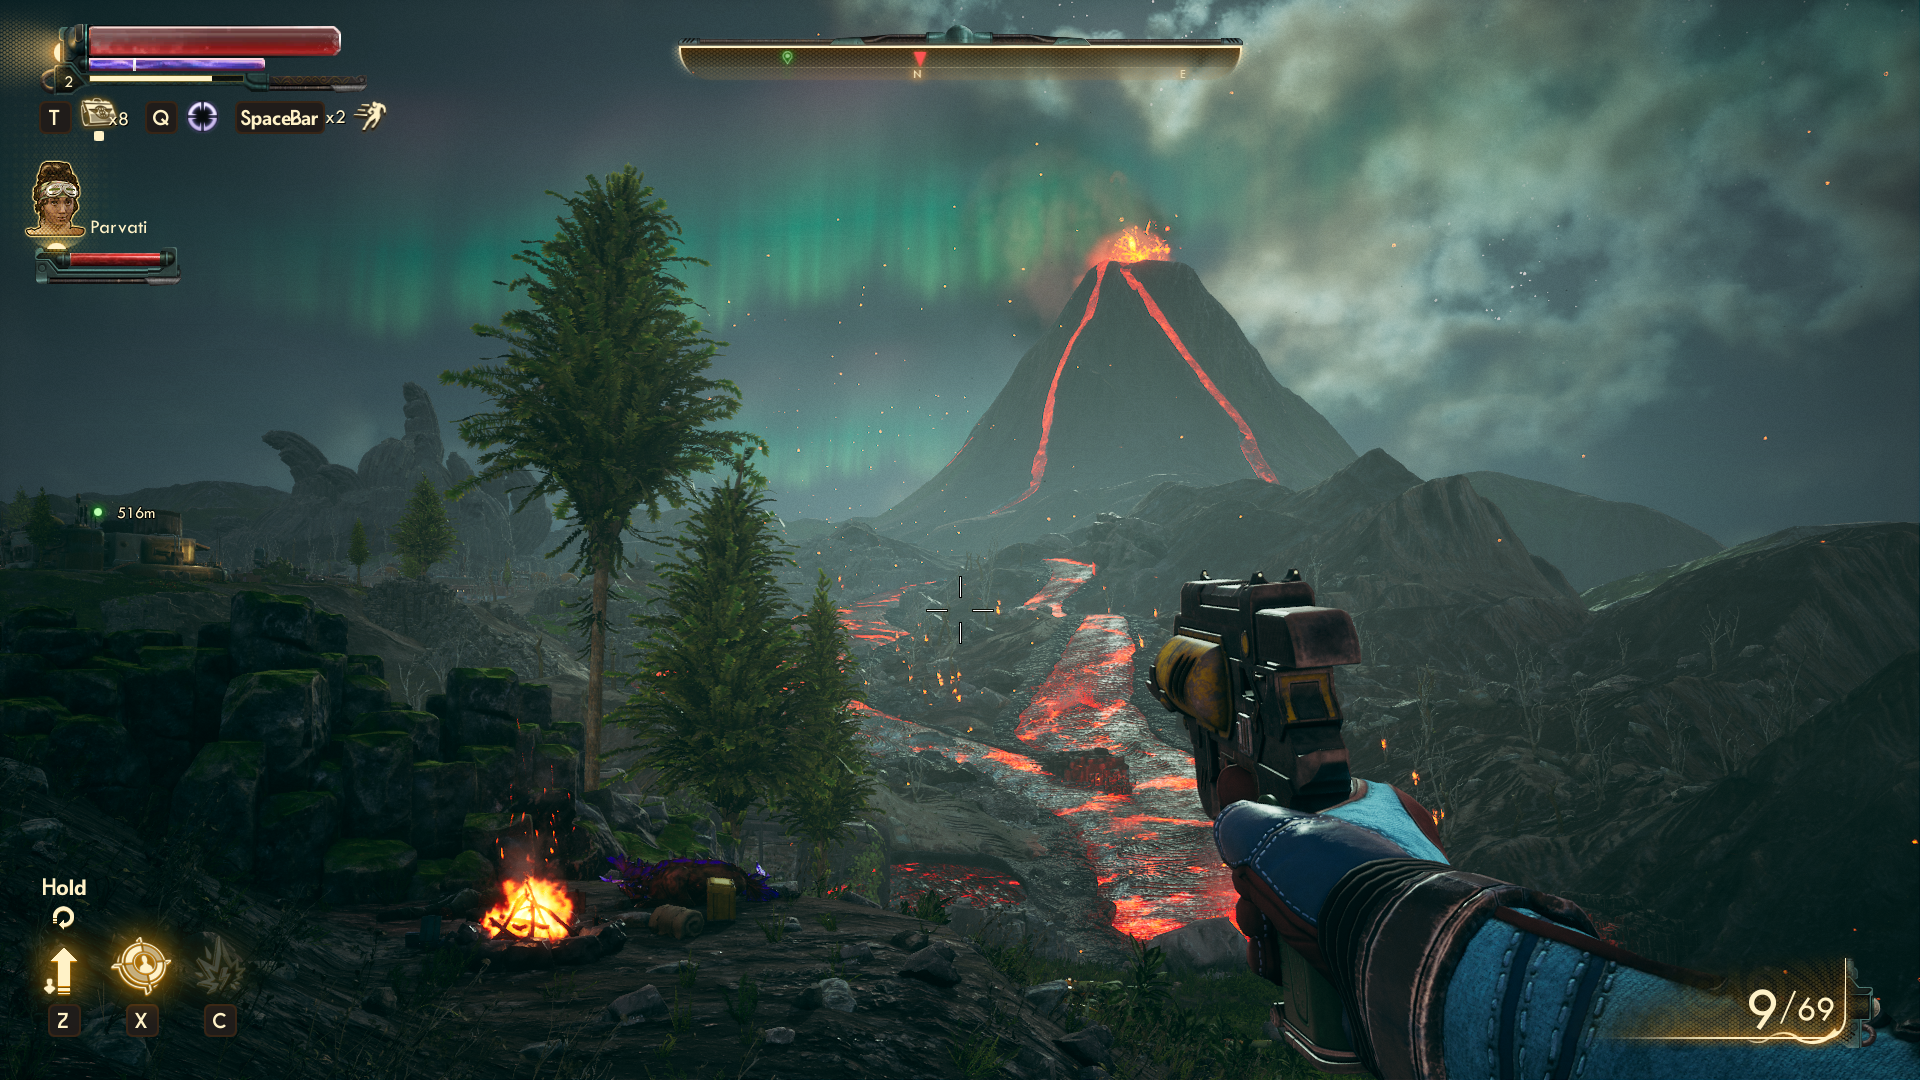 Looking out over flowing lava in a night time scene from The Outer Worlds: Spacer’s Choice Edition.